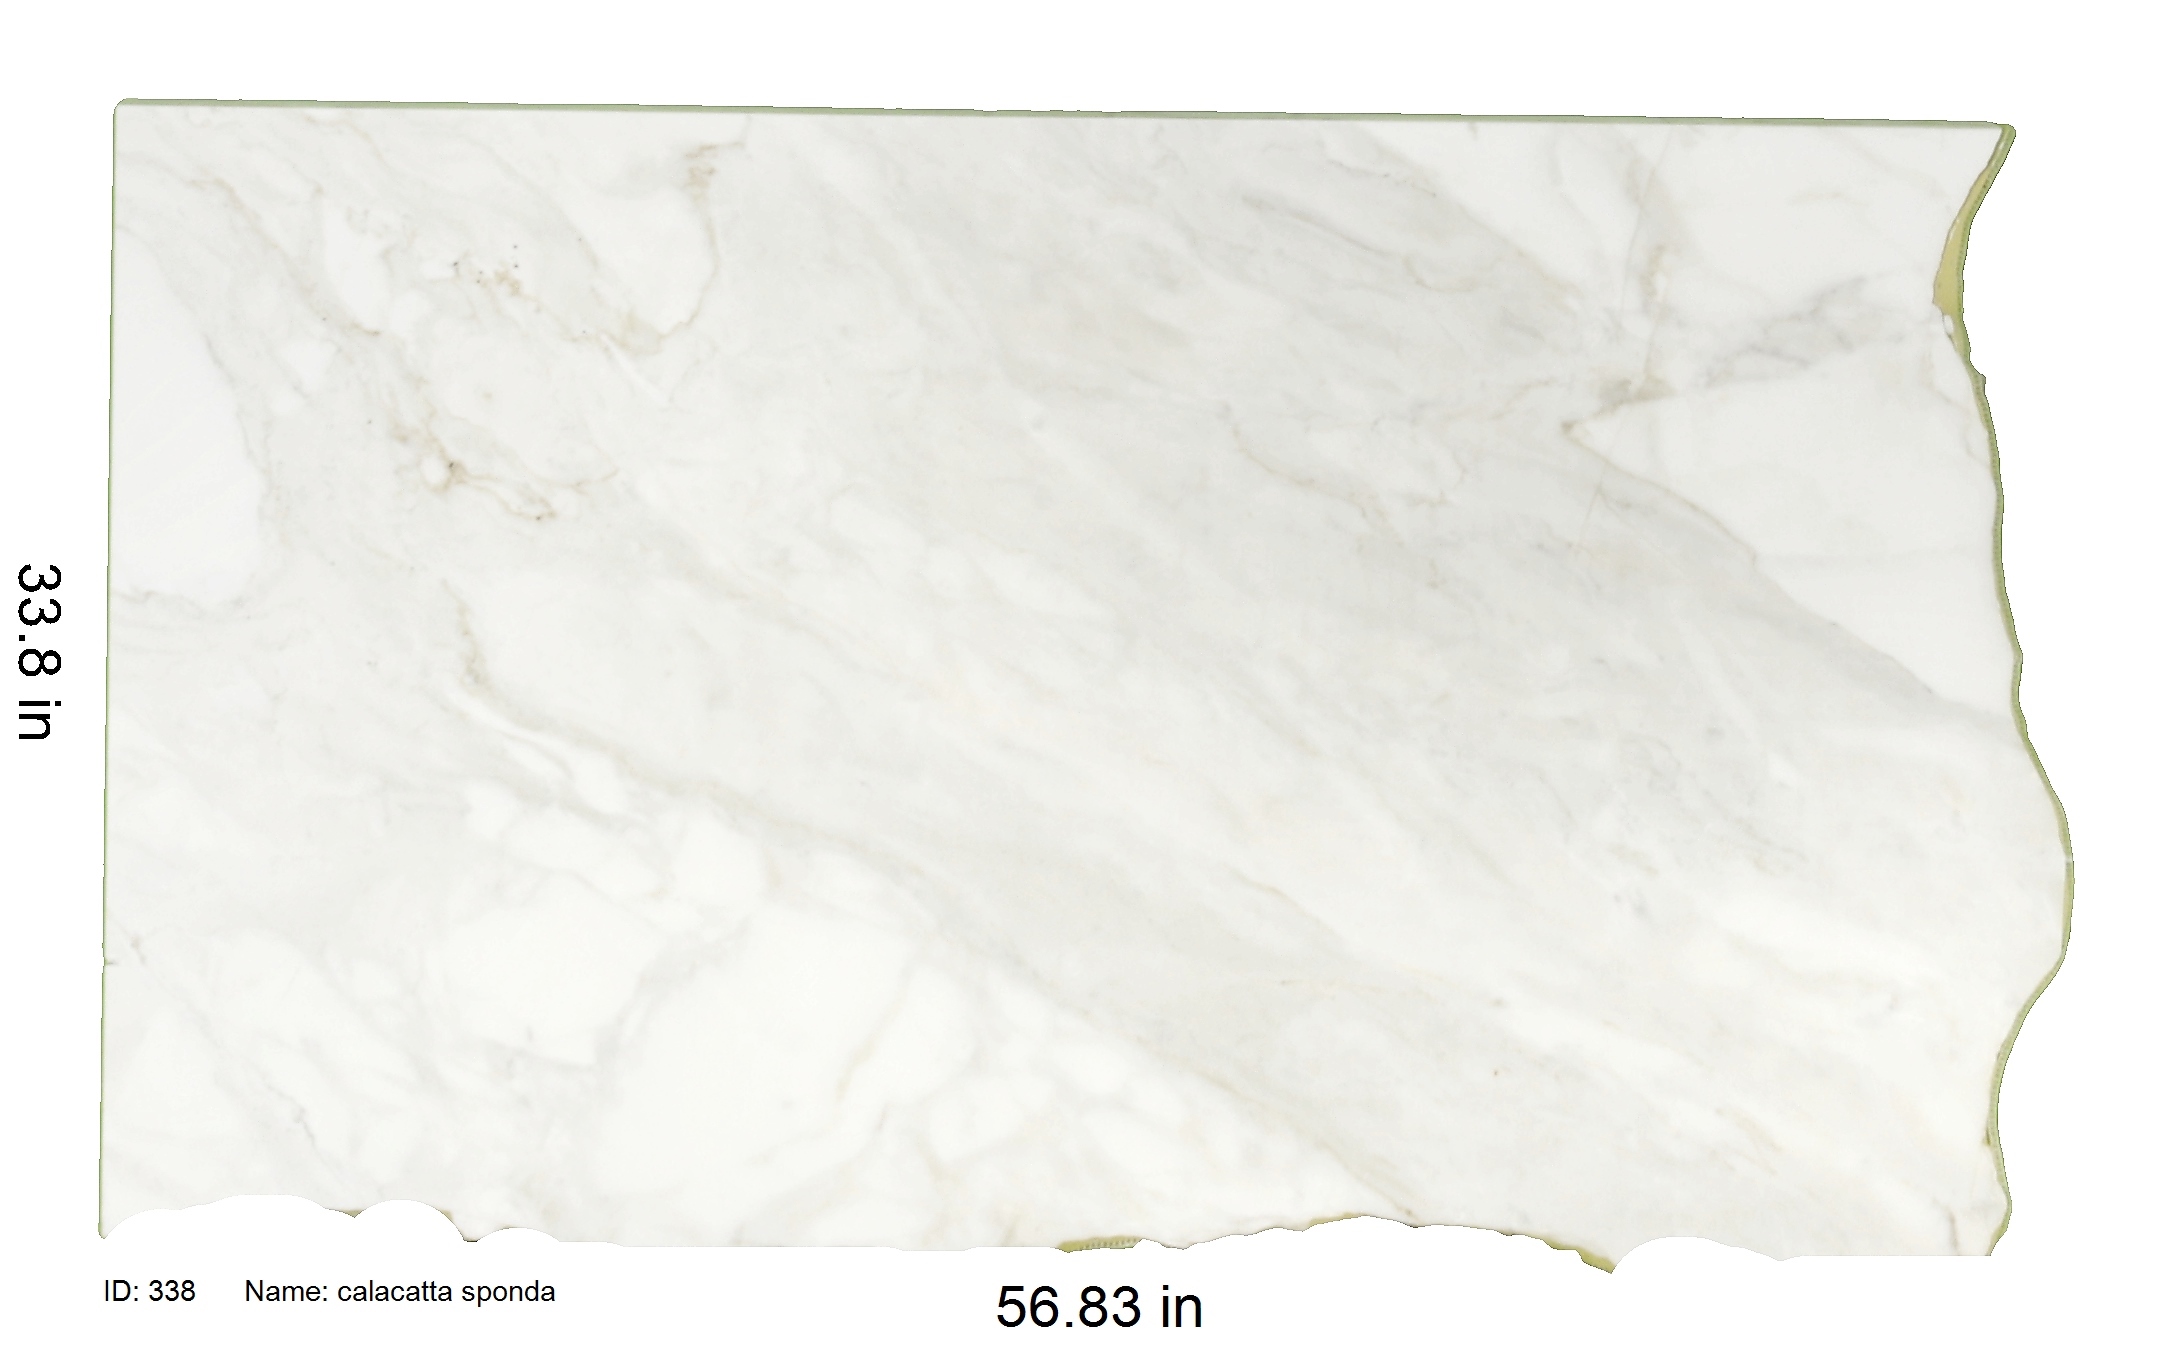 White Marble With Beige And Grey Veining<br />
ID: 338<br />
Name: Calacatta Sponda<br />
Size: 33.8x56.83